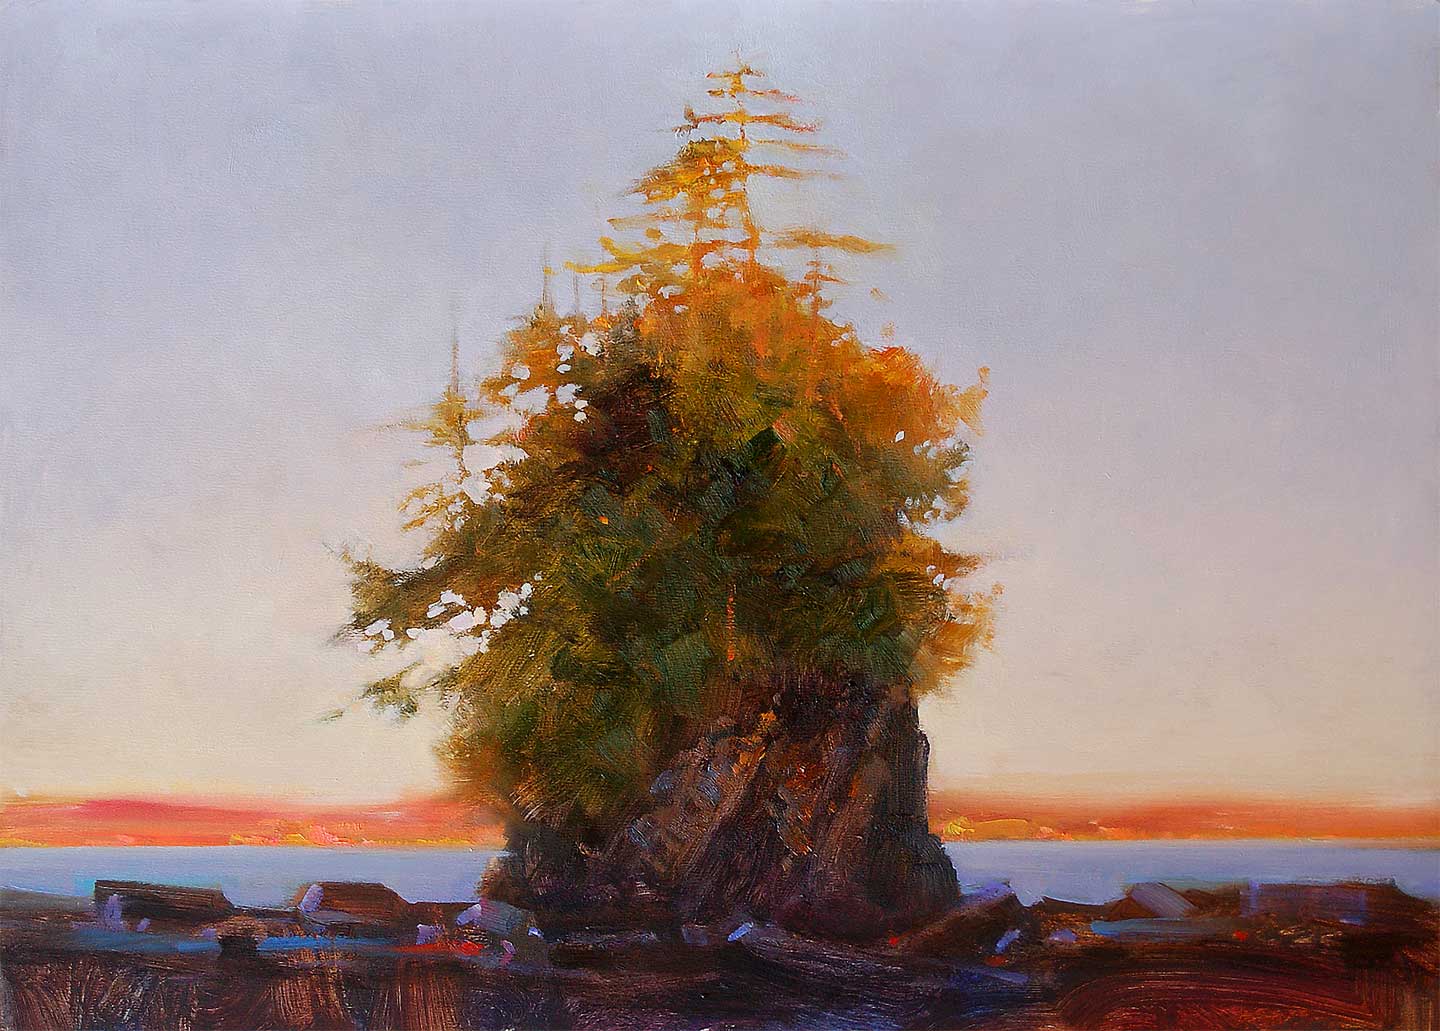 West coast of Vancouver Island BC 2010. 12 X 16 in. oil on prepared board